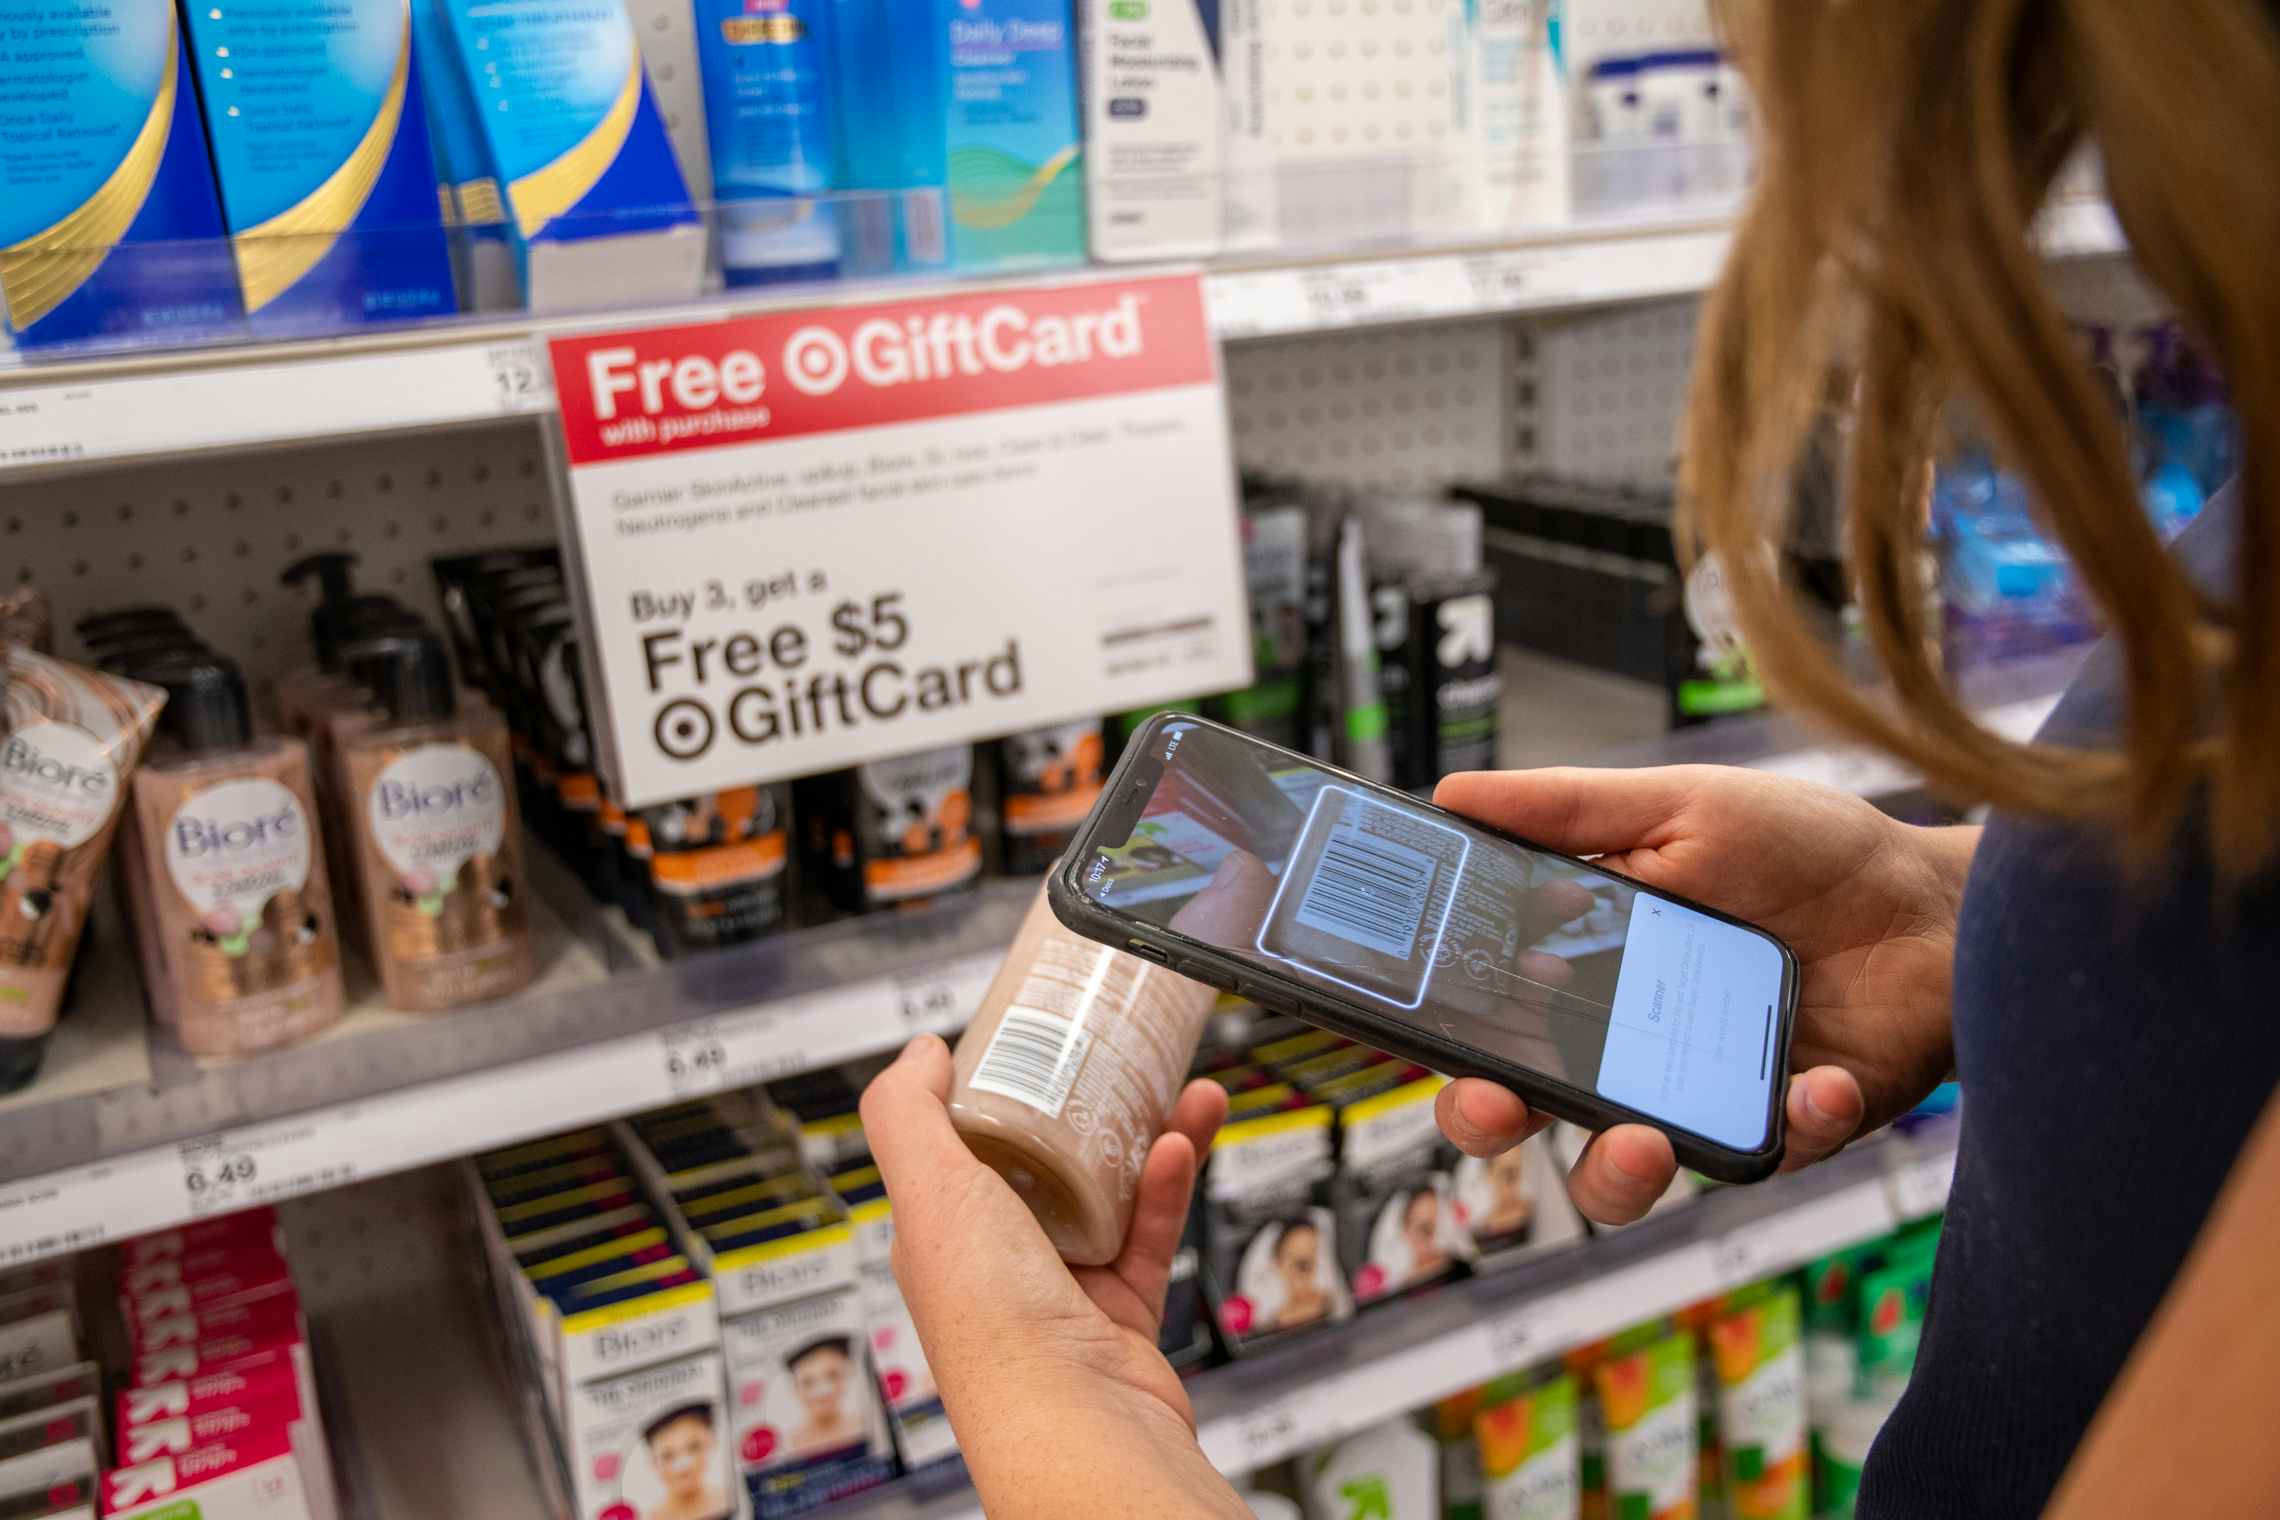 A person using the Target mobile app's barcode scanning feature to scan an item in front of a shelf at Target.